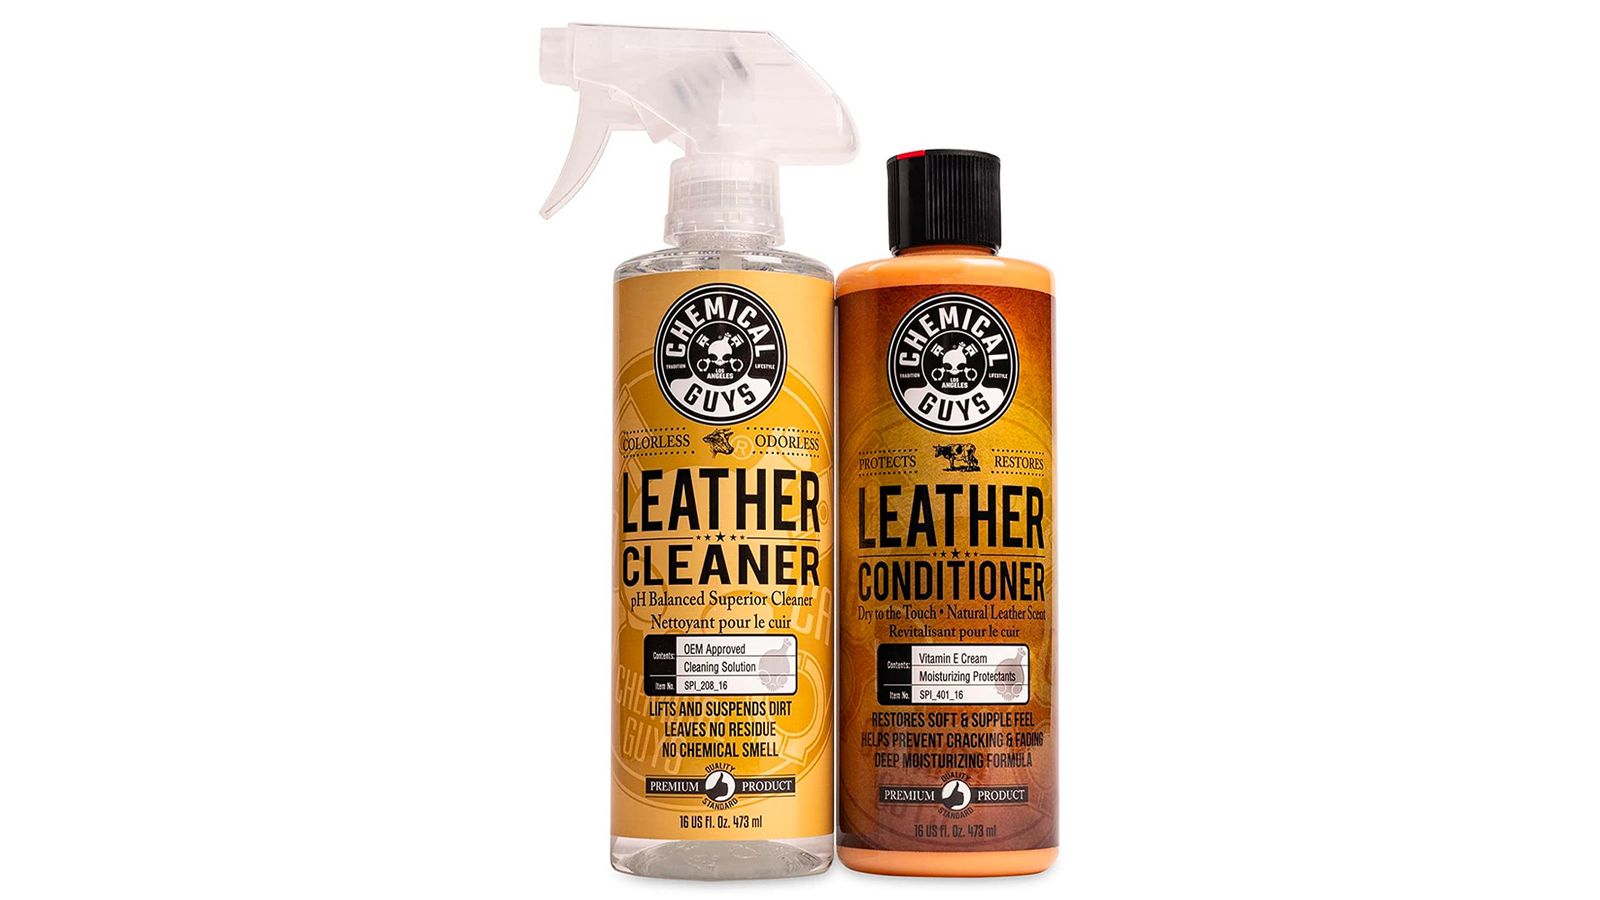 Chemical Guys Leather Cleaner & Conditioner product image of a clear spray bottle with an orange label next to the conditioner bottle with brown labelling.